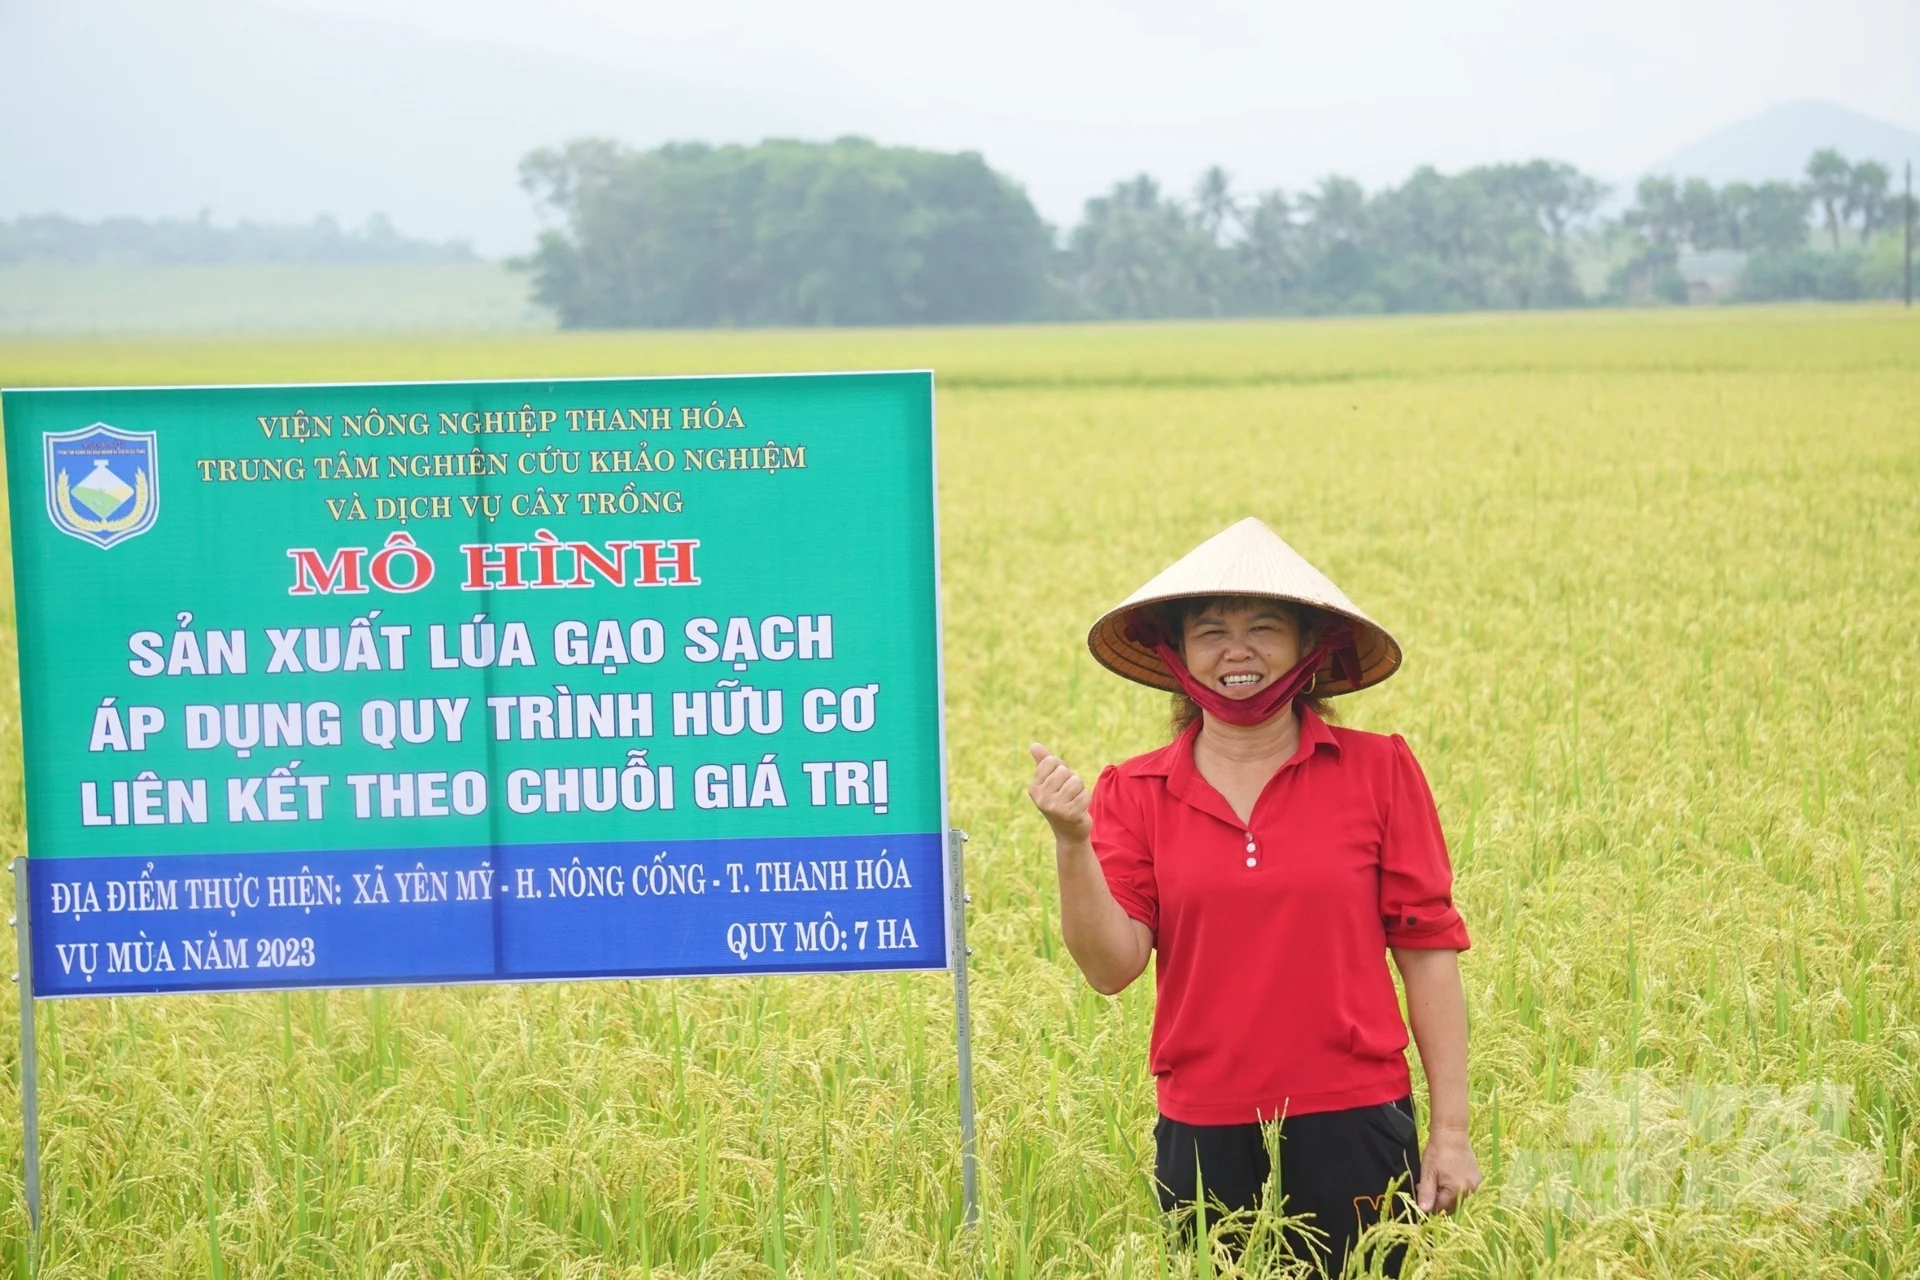 Farmers are excited because the organic rice model in Yen My commune has shown positive results. Photo: Quoc Toan.